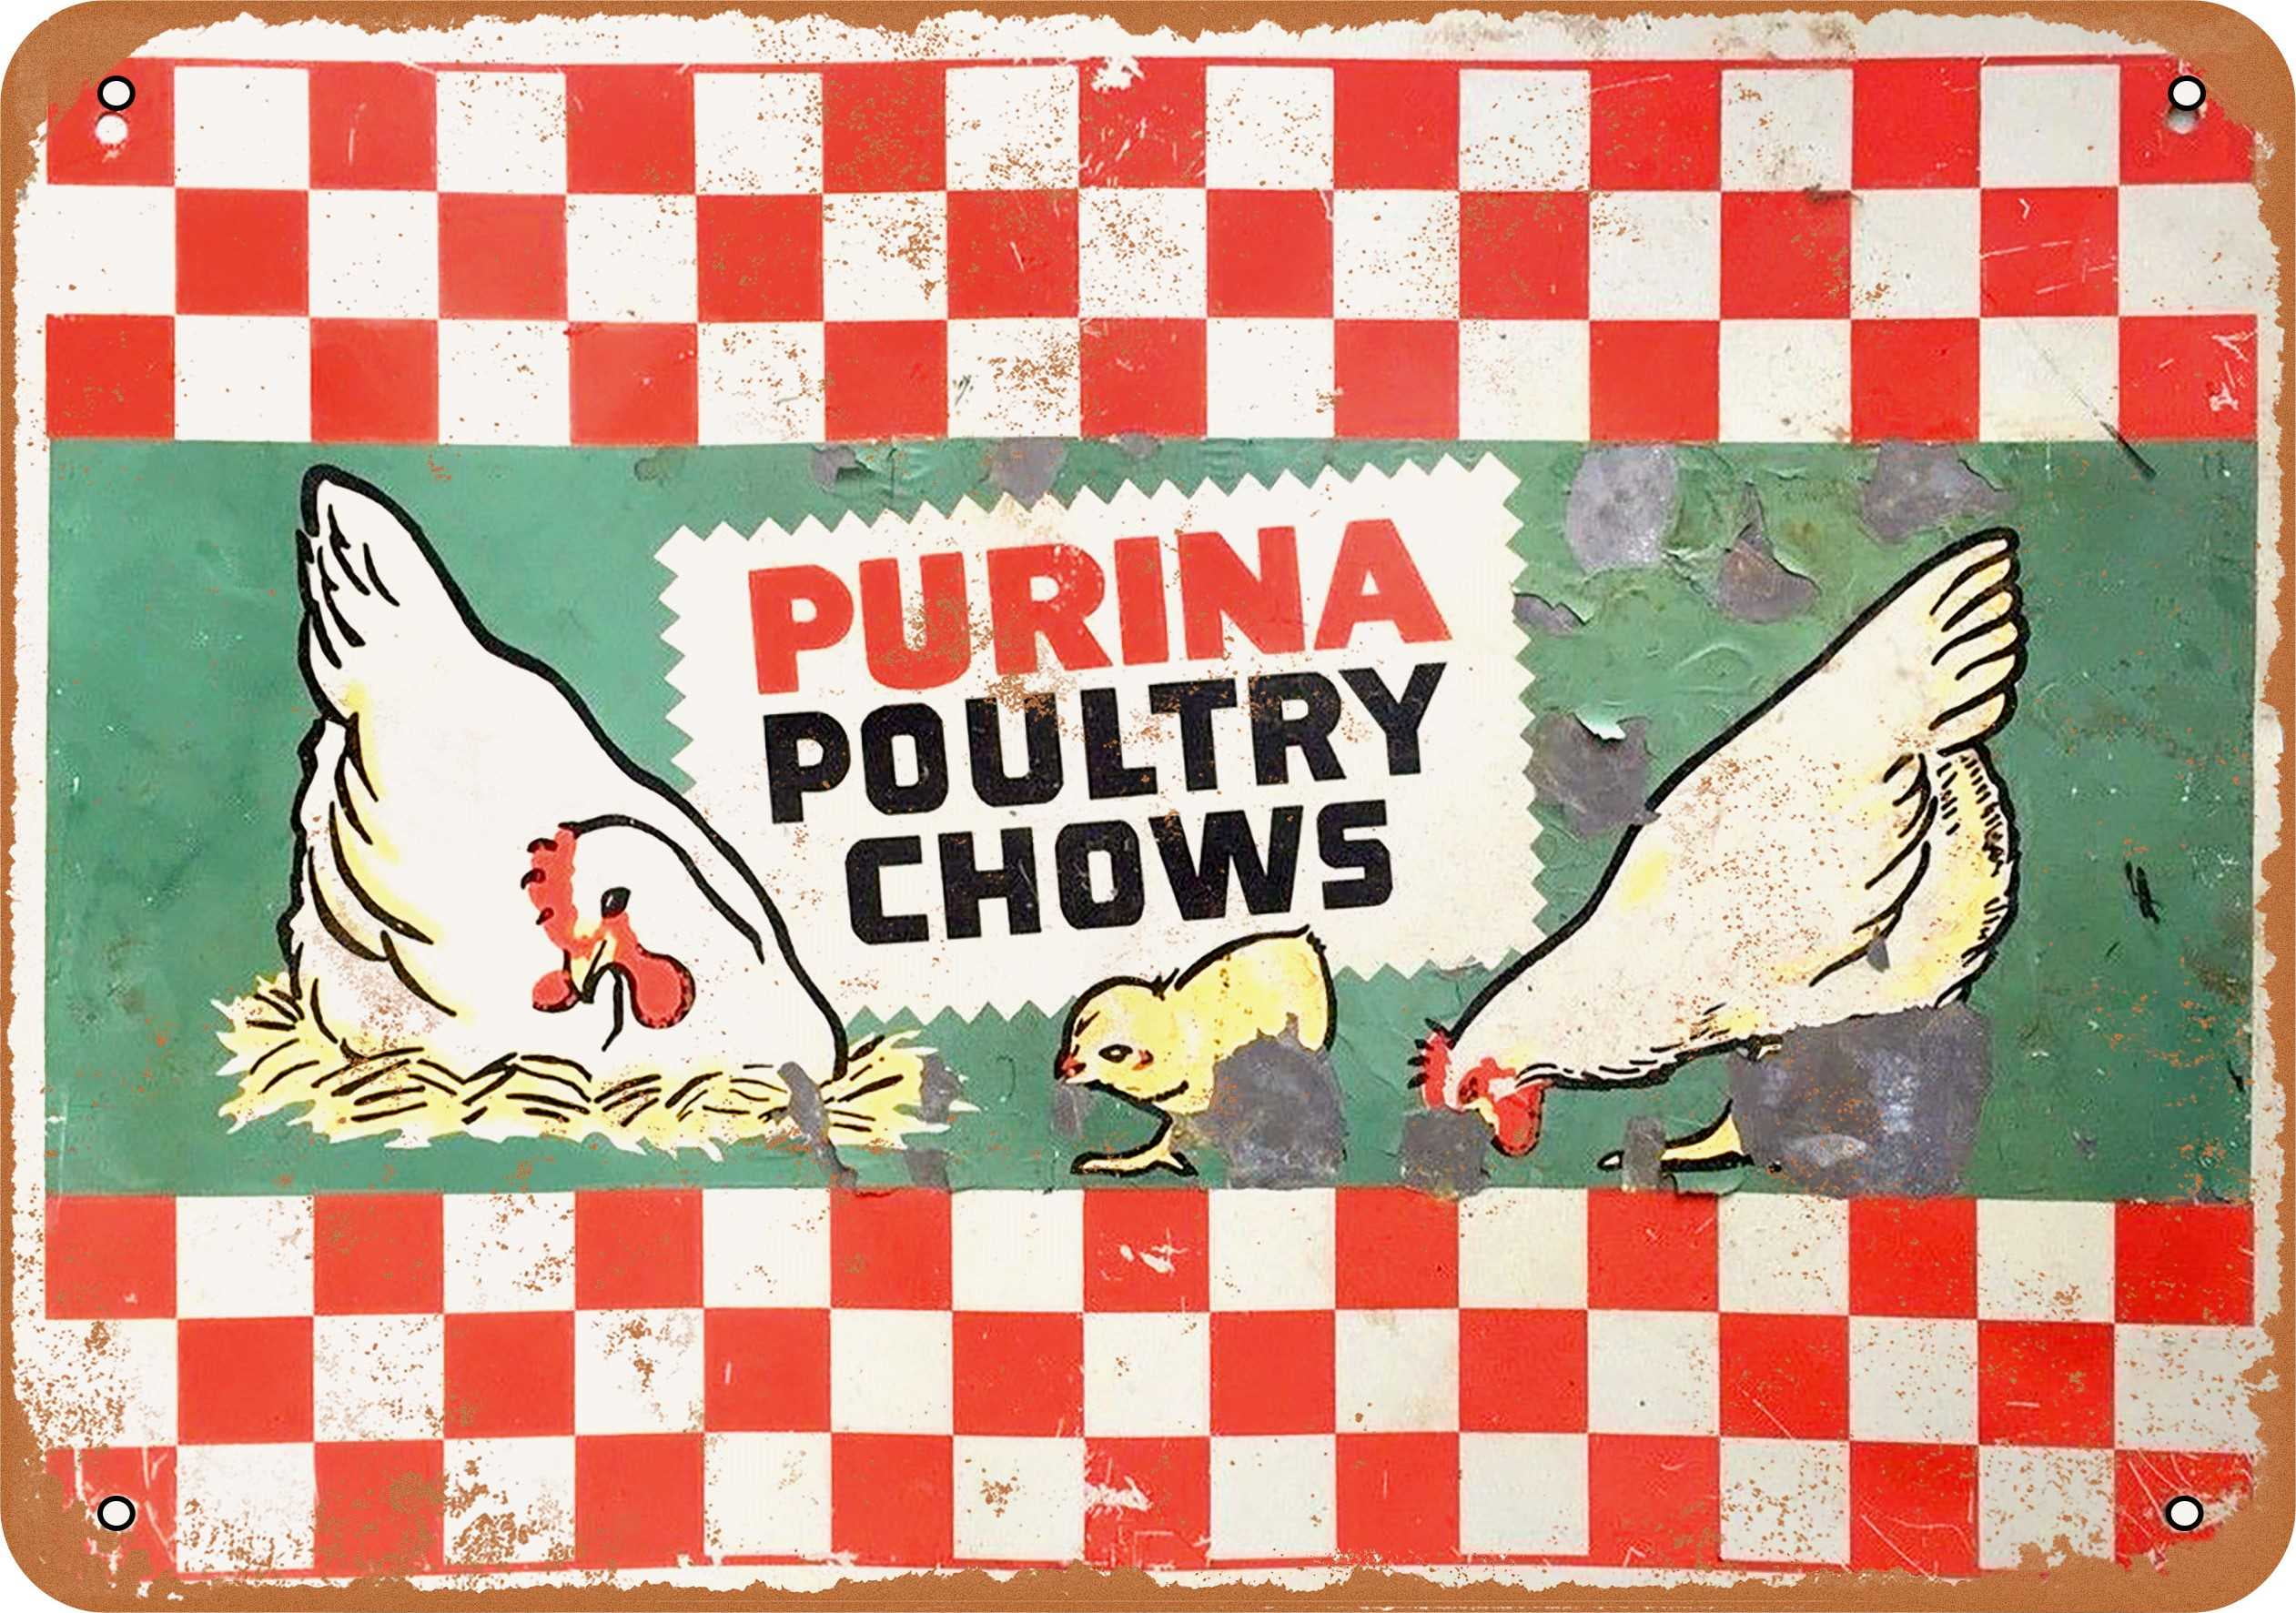 1950s chicken Purina poultry Chows metal tin sign metal metal plaque unturned 